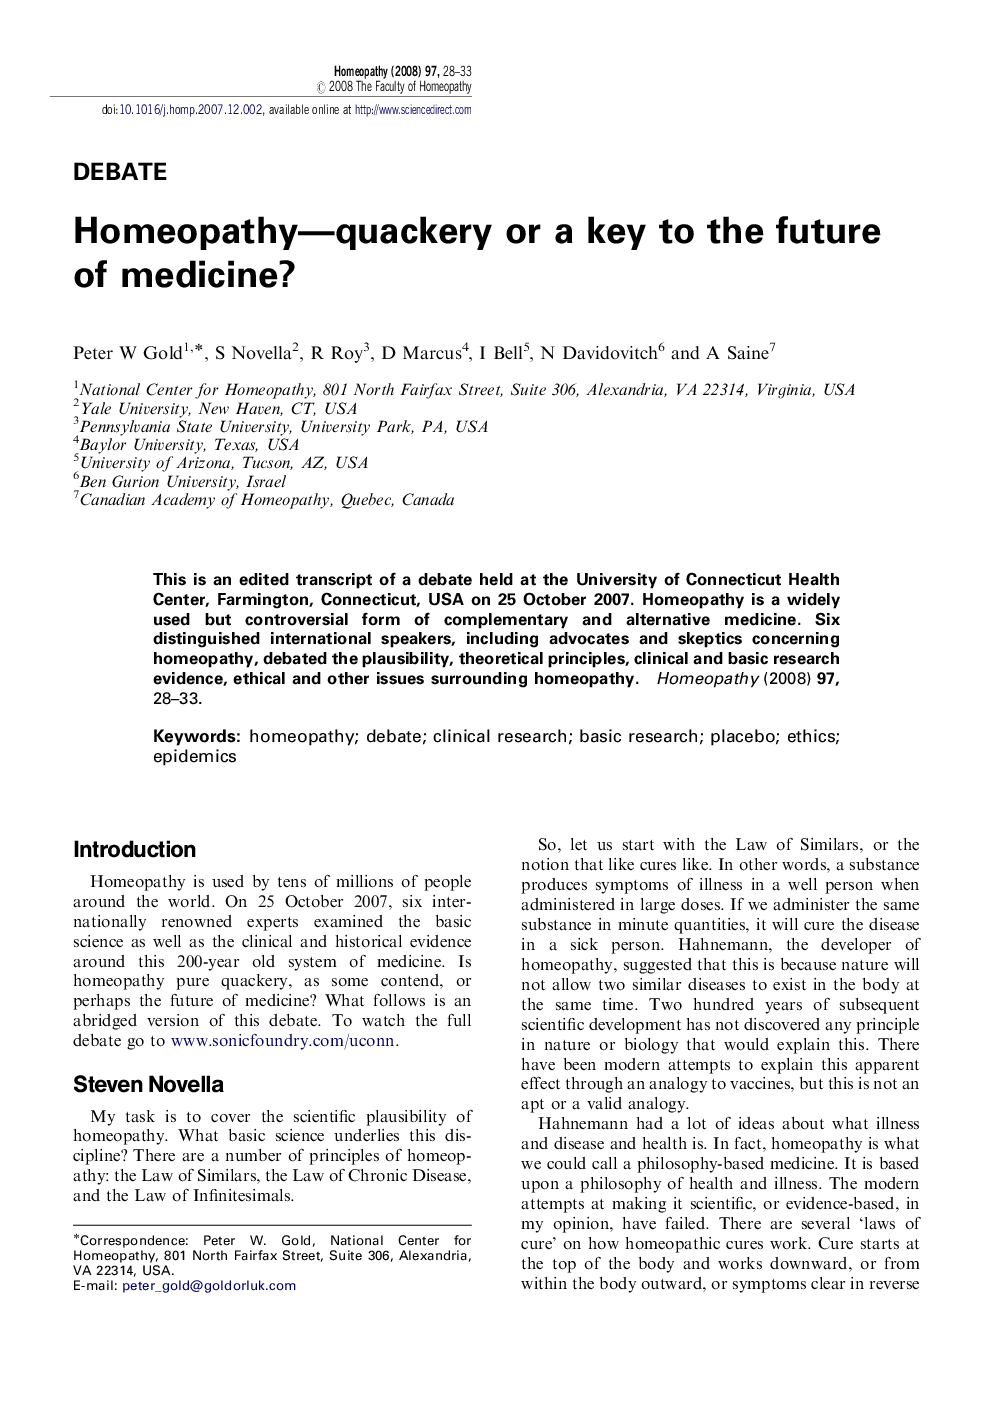 Homeopathy—quackery or a key to the future of medicine?